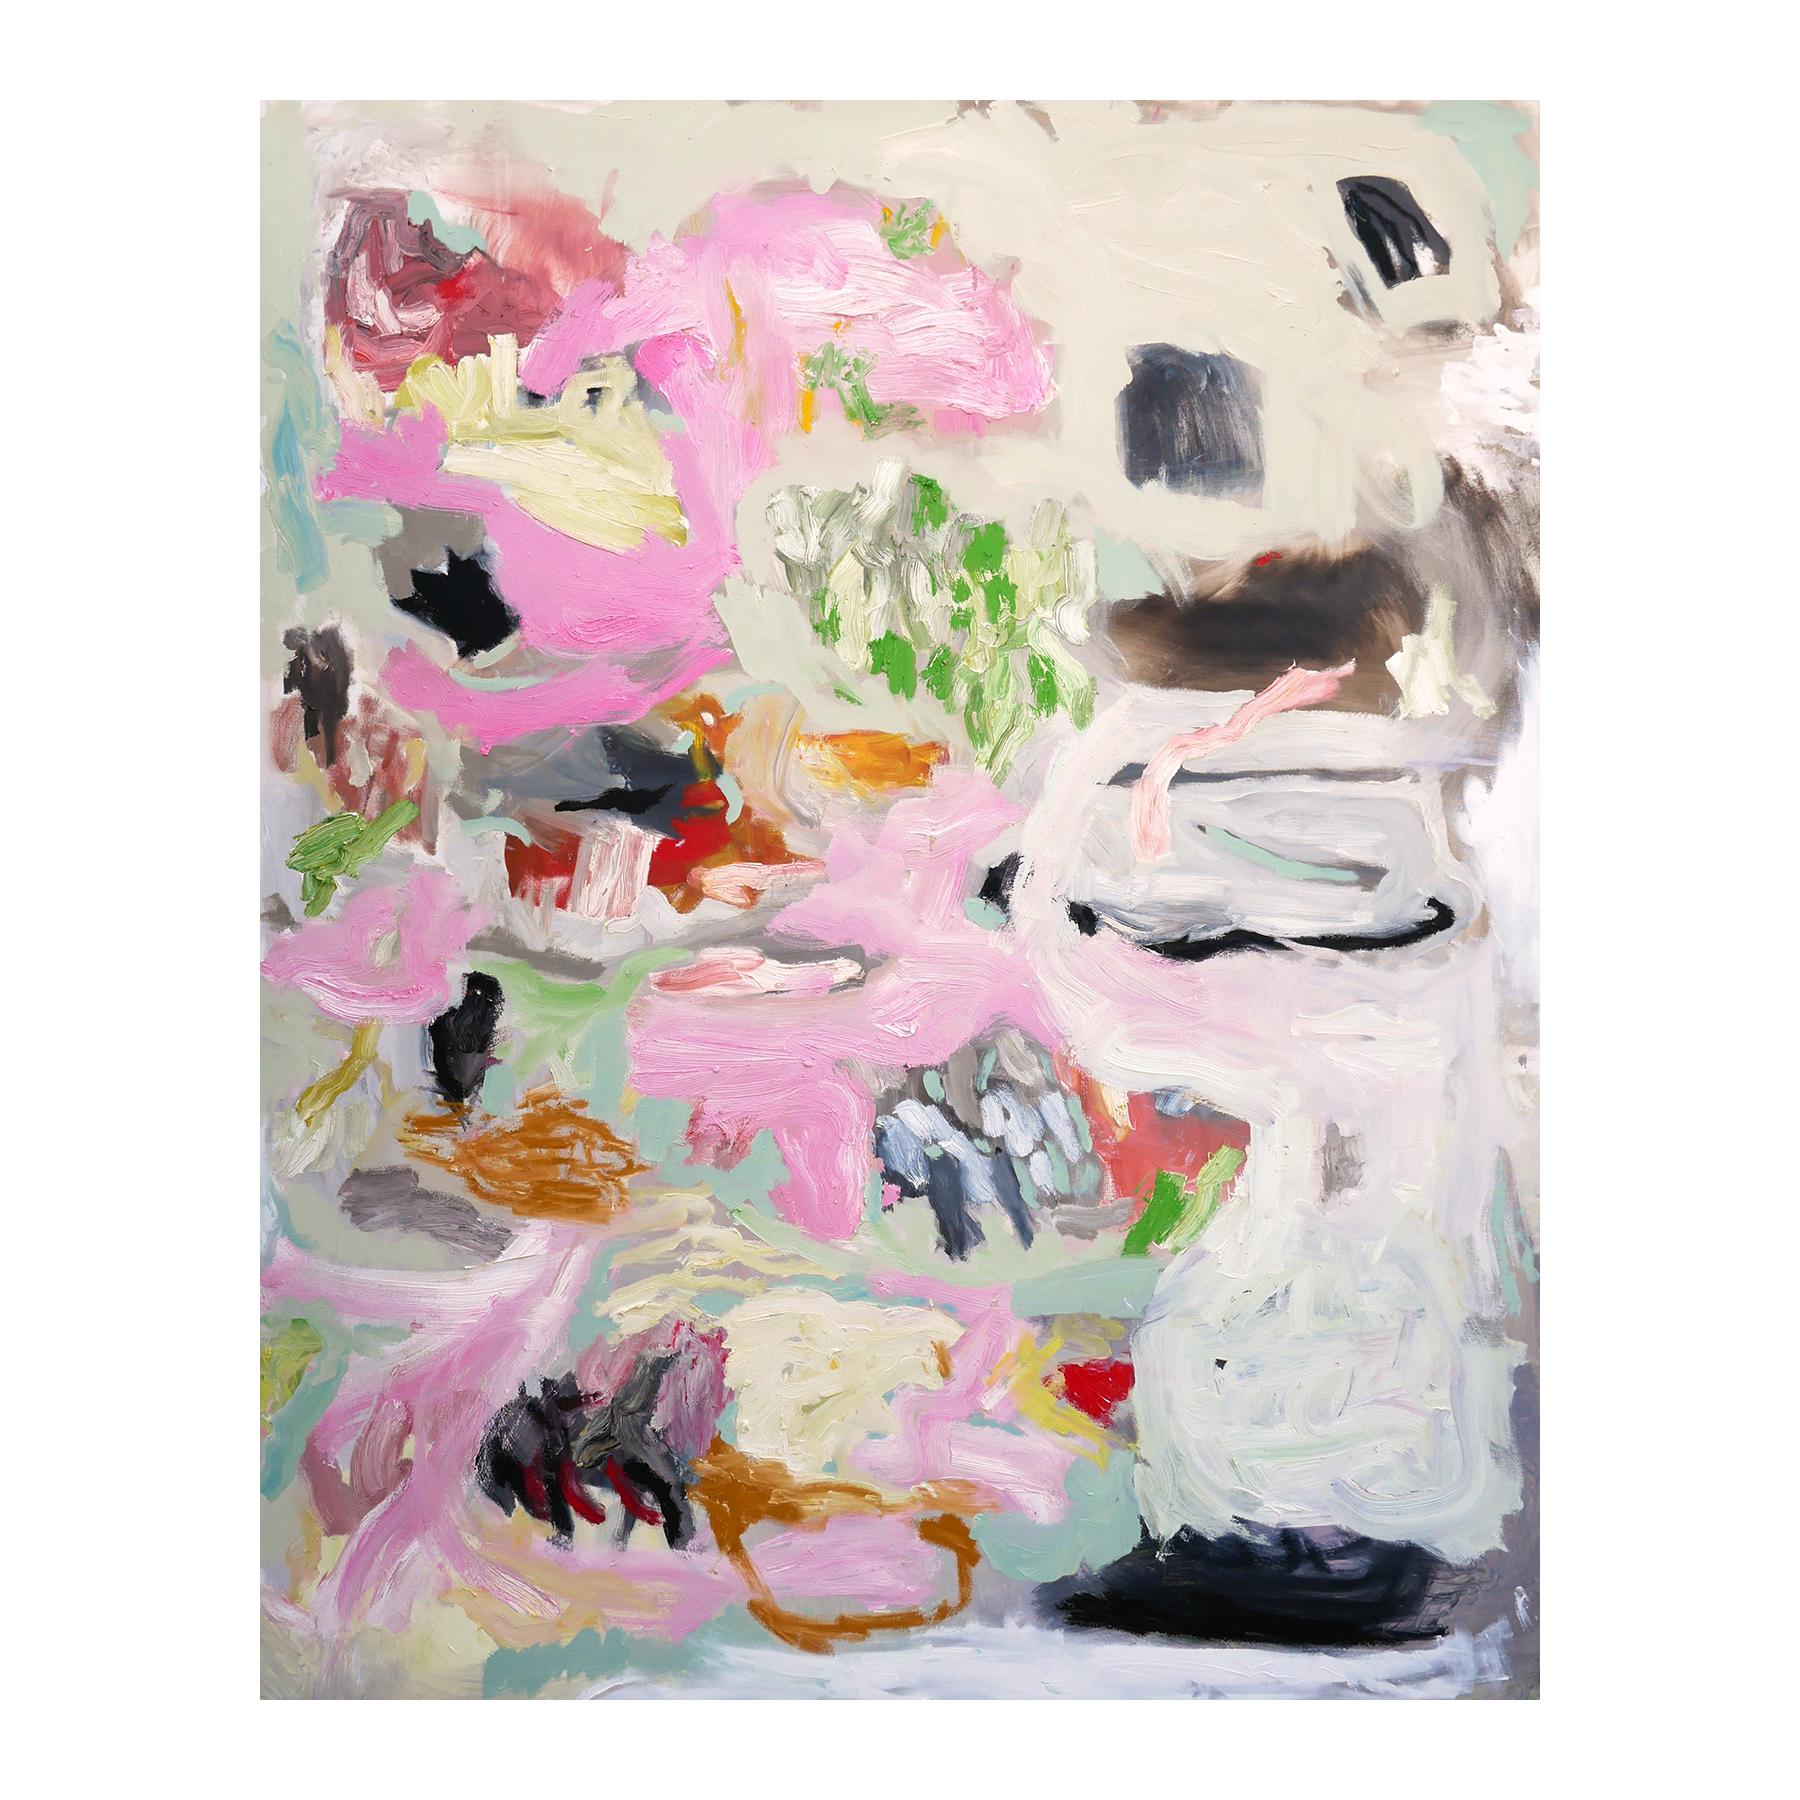 Abstract expressionist oil painting by contemporary Houston artist Benji Stiles. The work features gestural marks and rounded shapes in pastel pink, green, and orange tones set against a light background. Currently unframed, but options are